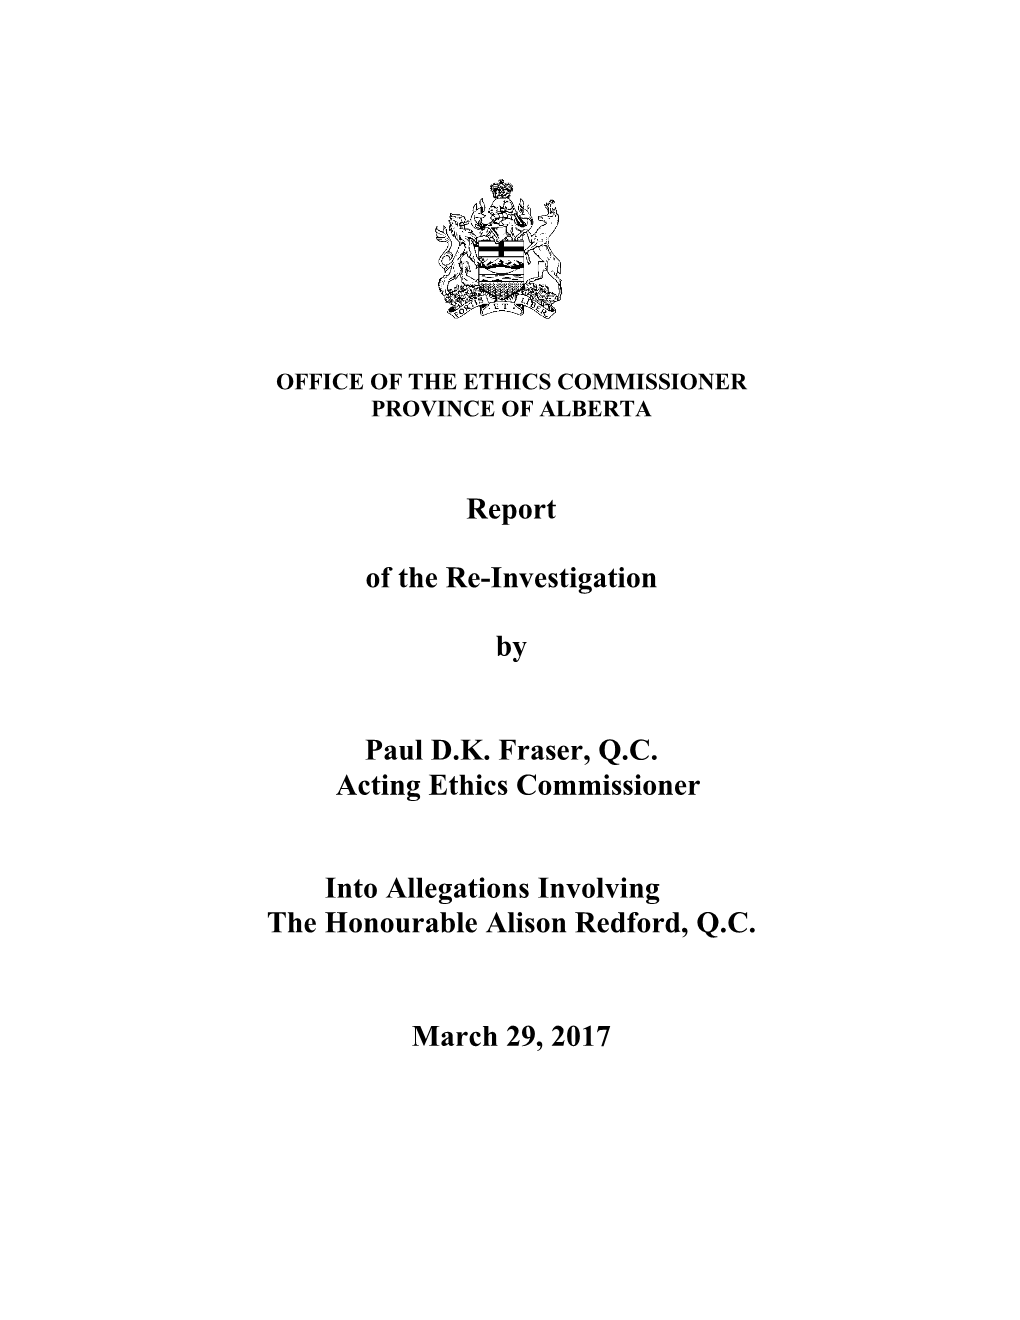 Report of the Re-Investigation Into Allegations Involving the Honourable Alison Redford, Q.C